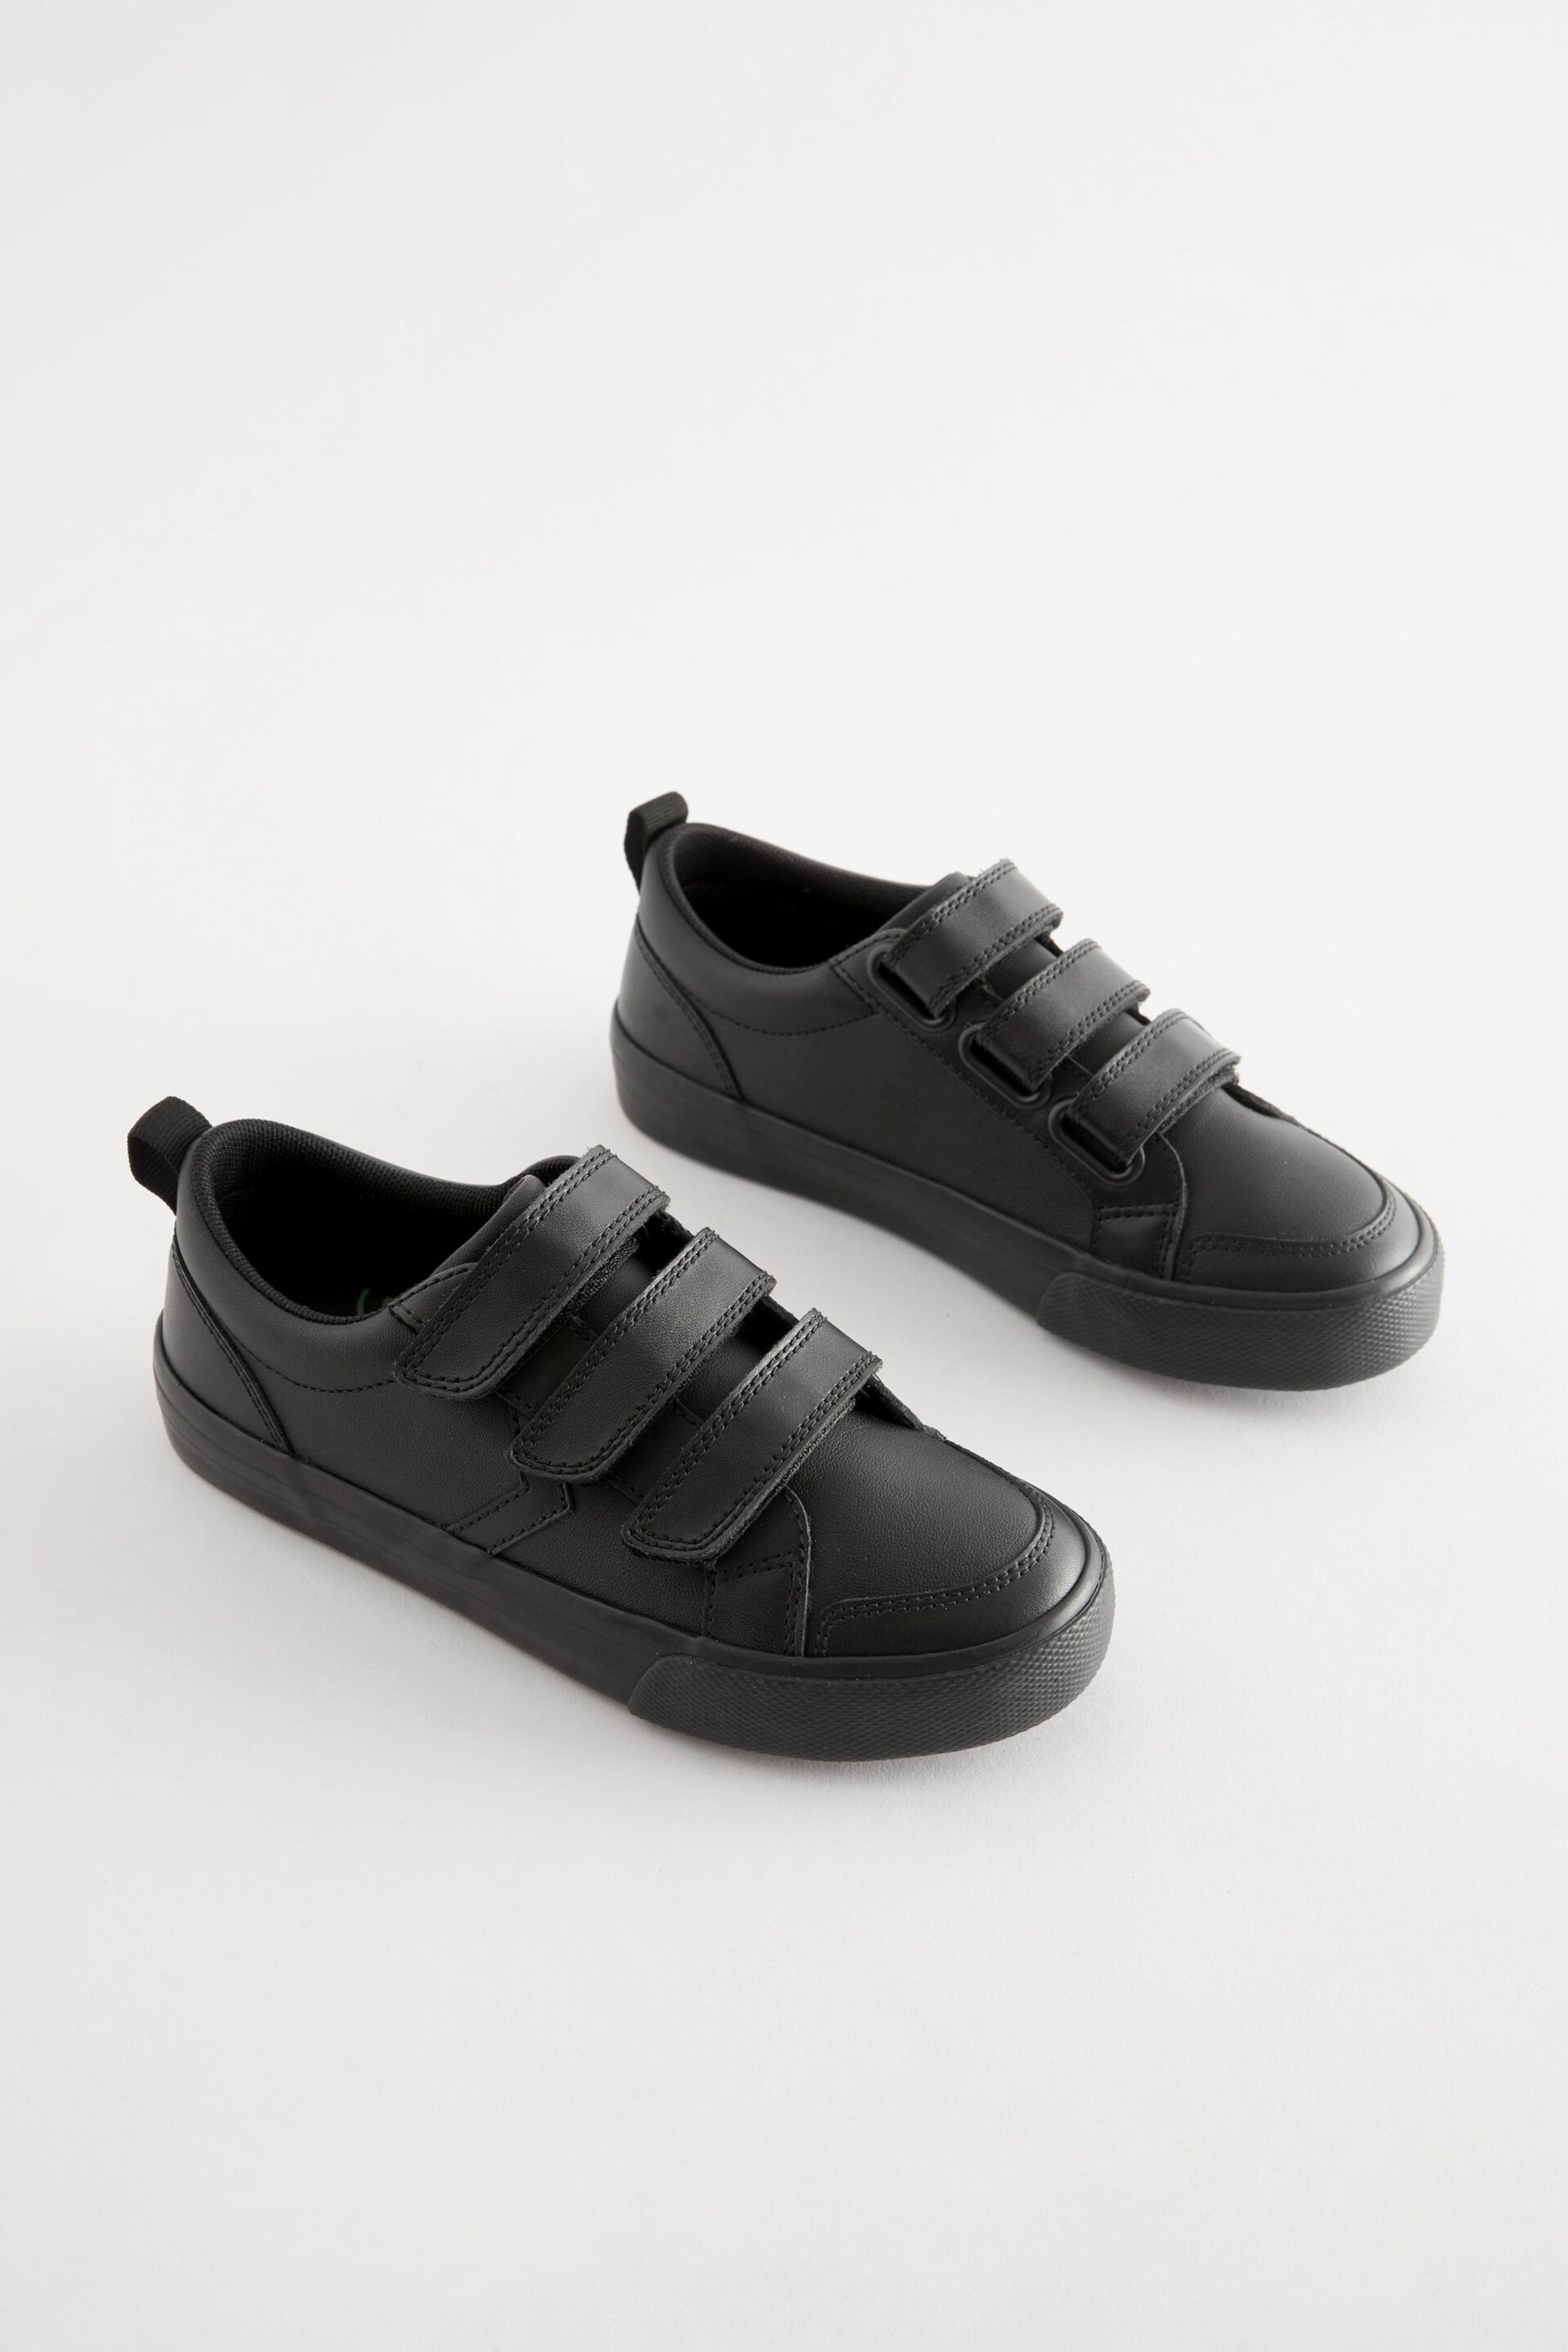 Black Wide Fit (G) School Touch Fastening 3 Strap Shoes - Image 1 of 6